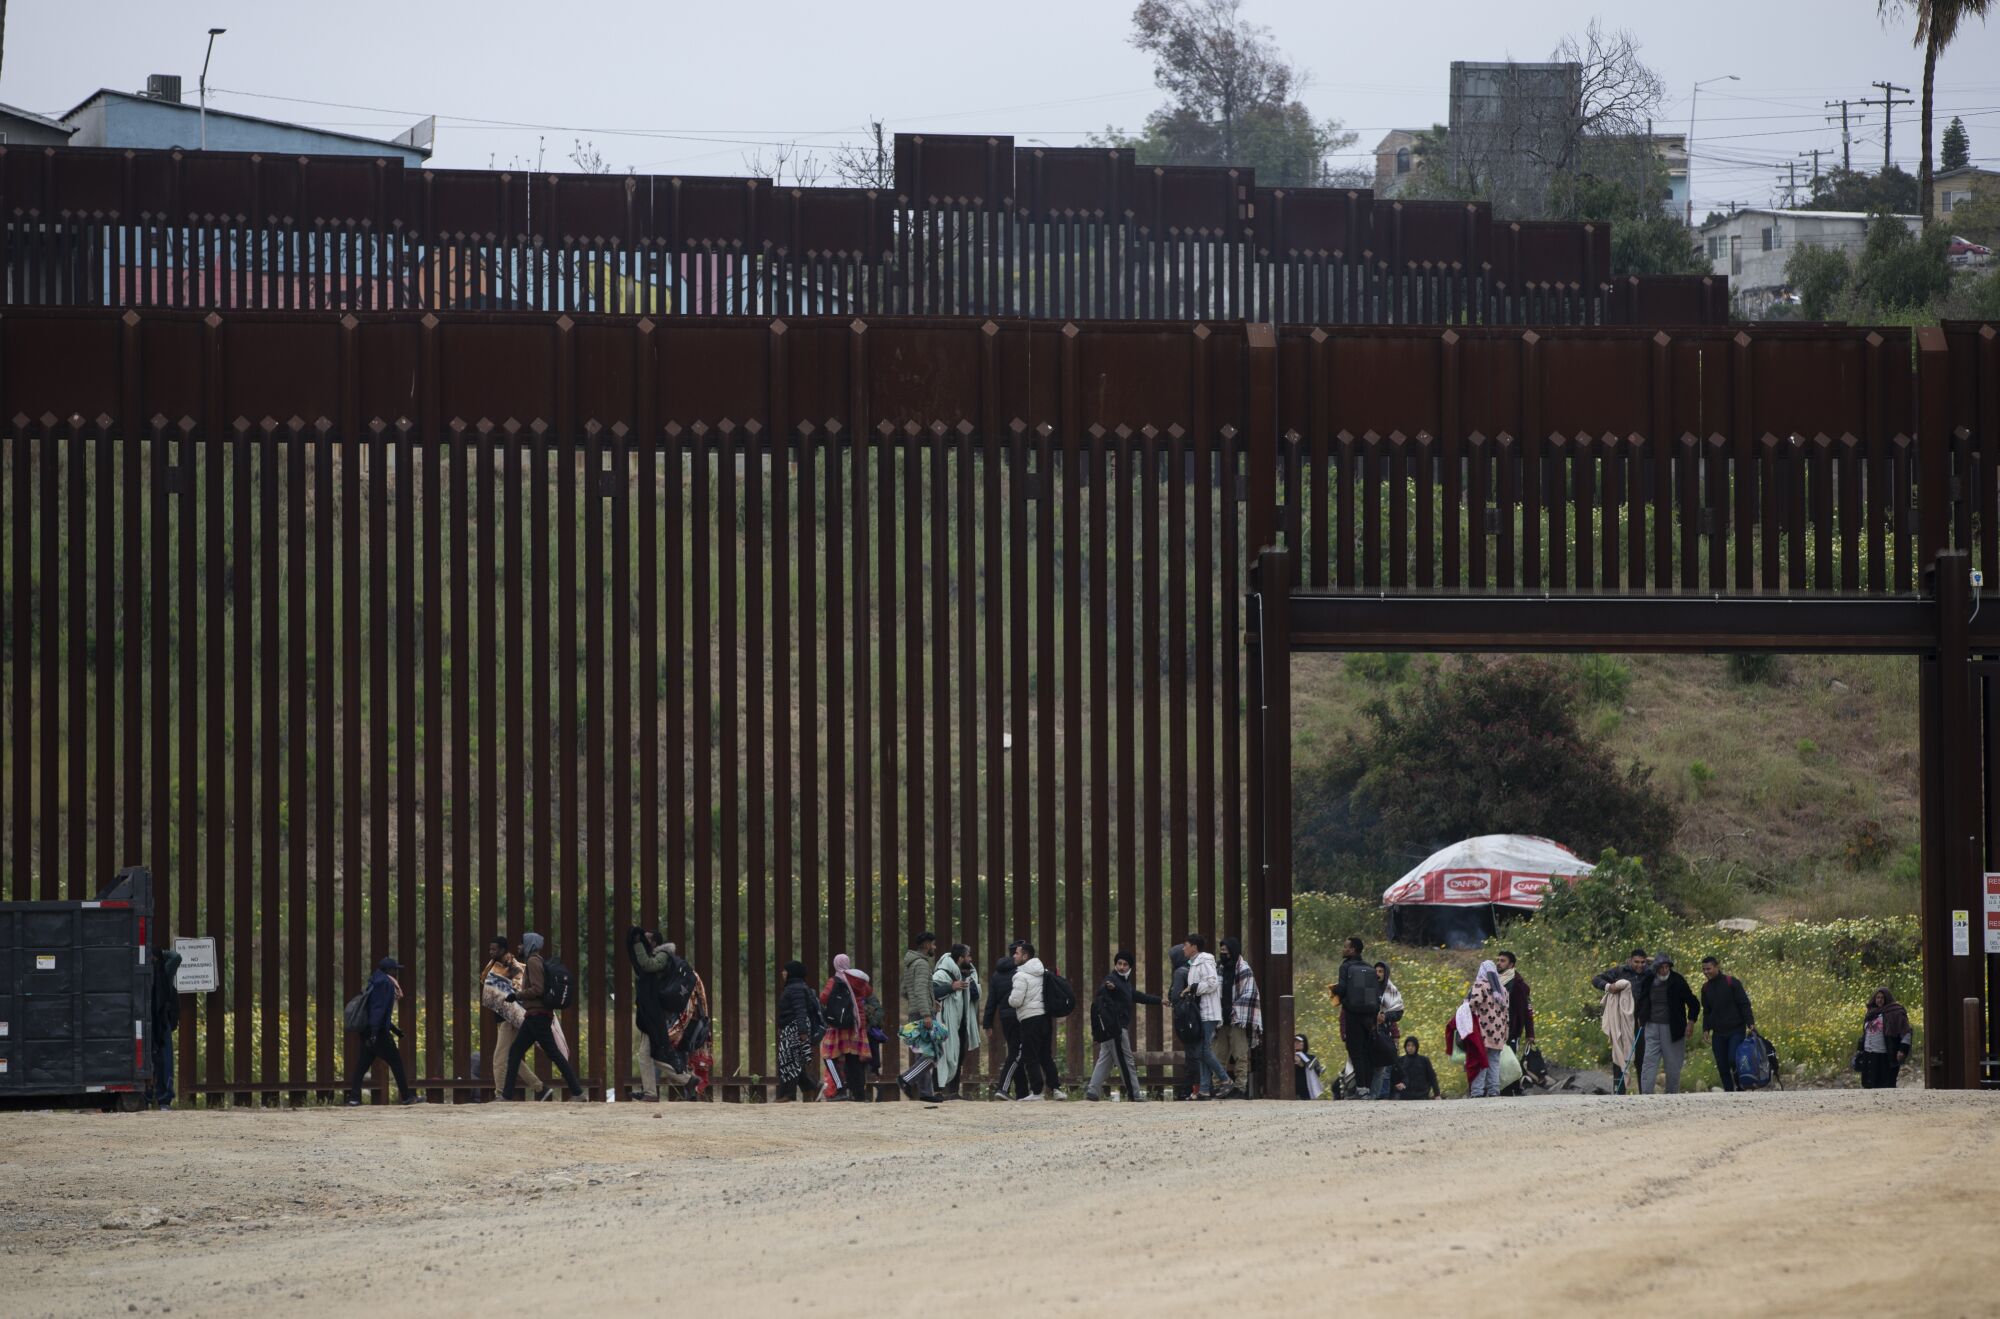 Dozens of asylum seeking migrants run out of an open gate before being stopped by U.S. Border Patrol agents